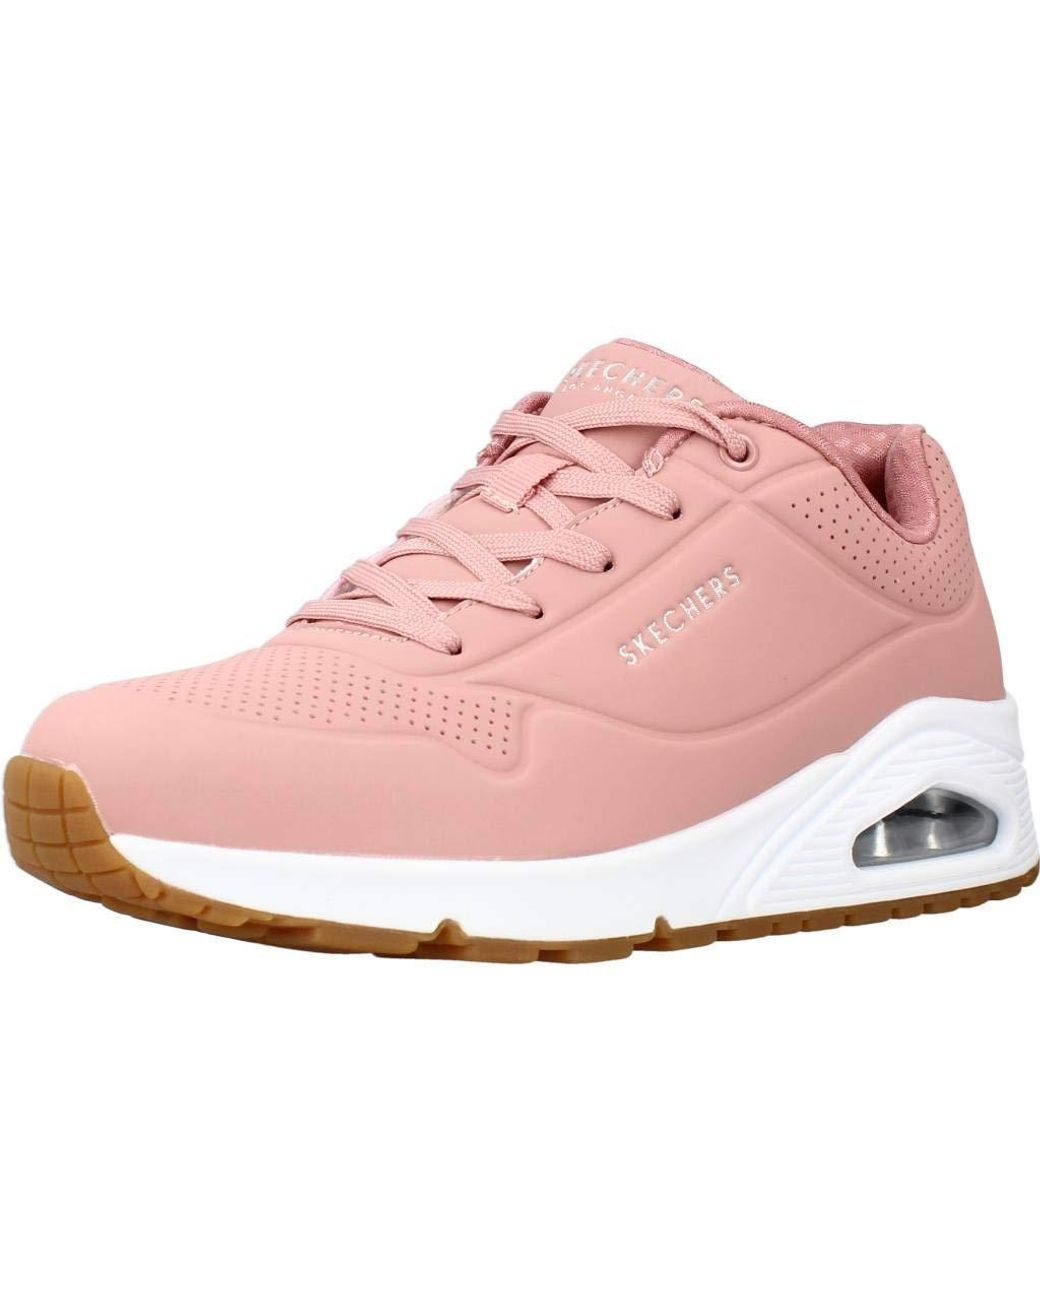 Skechers Uno-stand On Air Sneaker in Rose (Pink) - Save 26% - Lyst